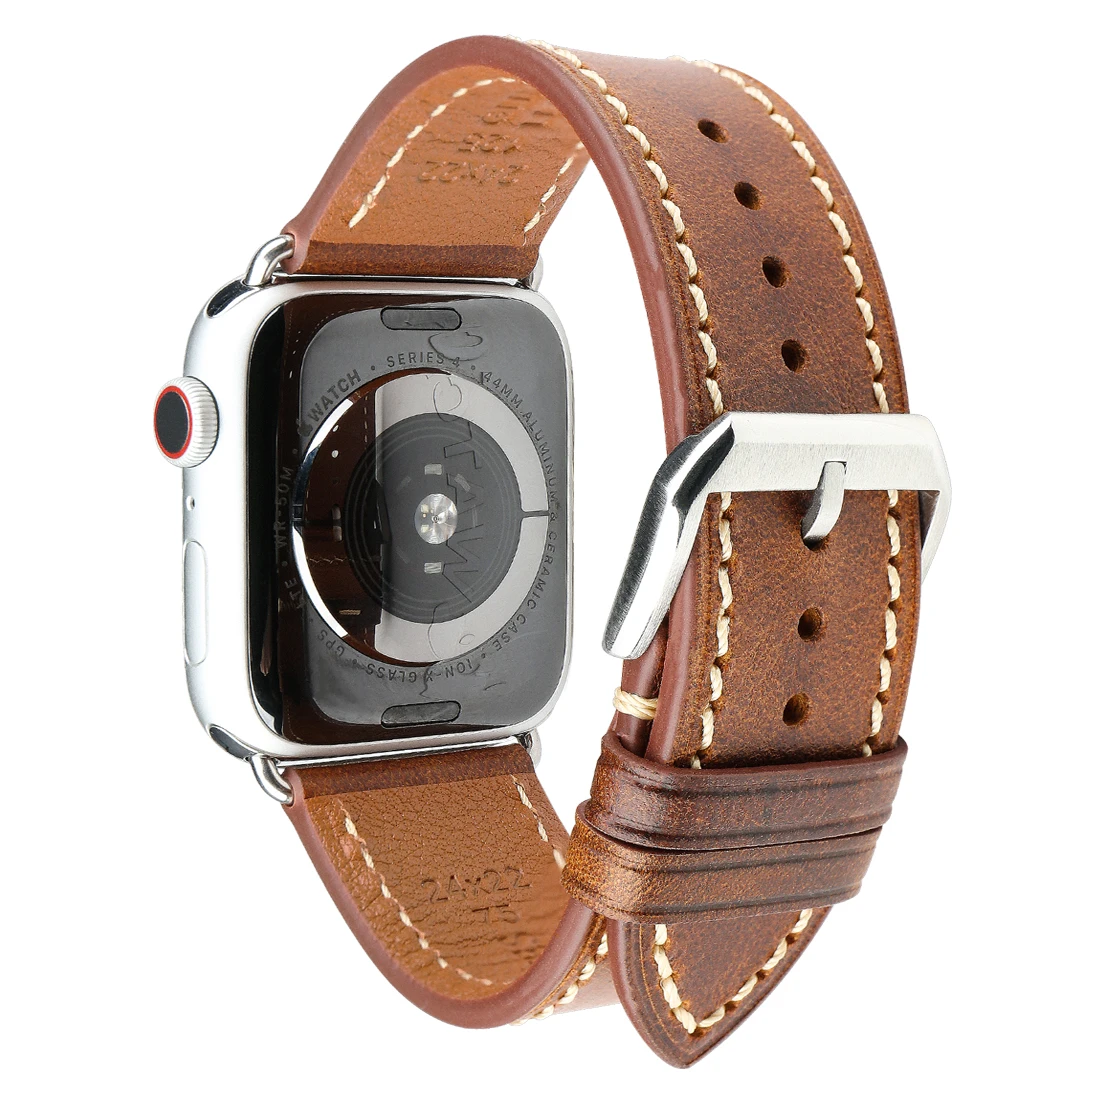 

Newest Styles Genuine Italian Leather Watch Strap for Luxury Leather Apple Watch Bands 44 42 40 38mm iWatch Series 6 SE 5 4 Loop